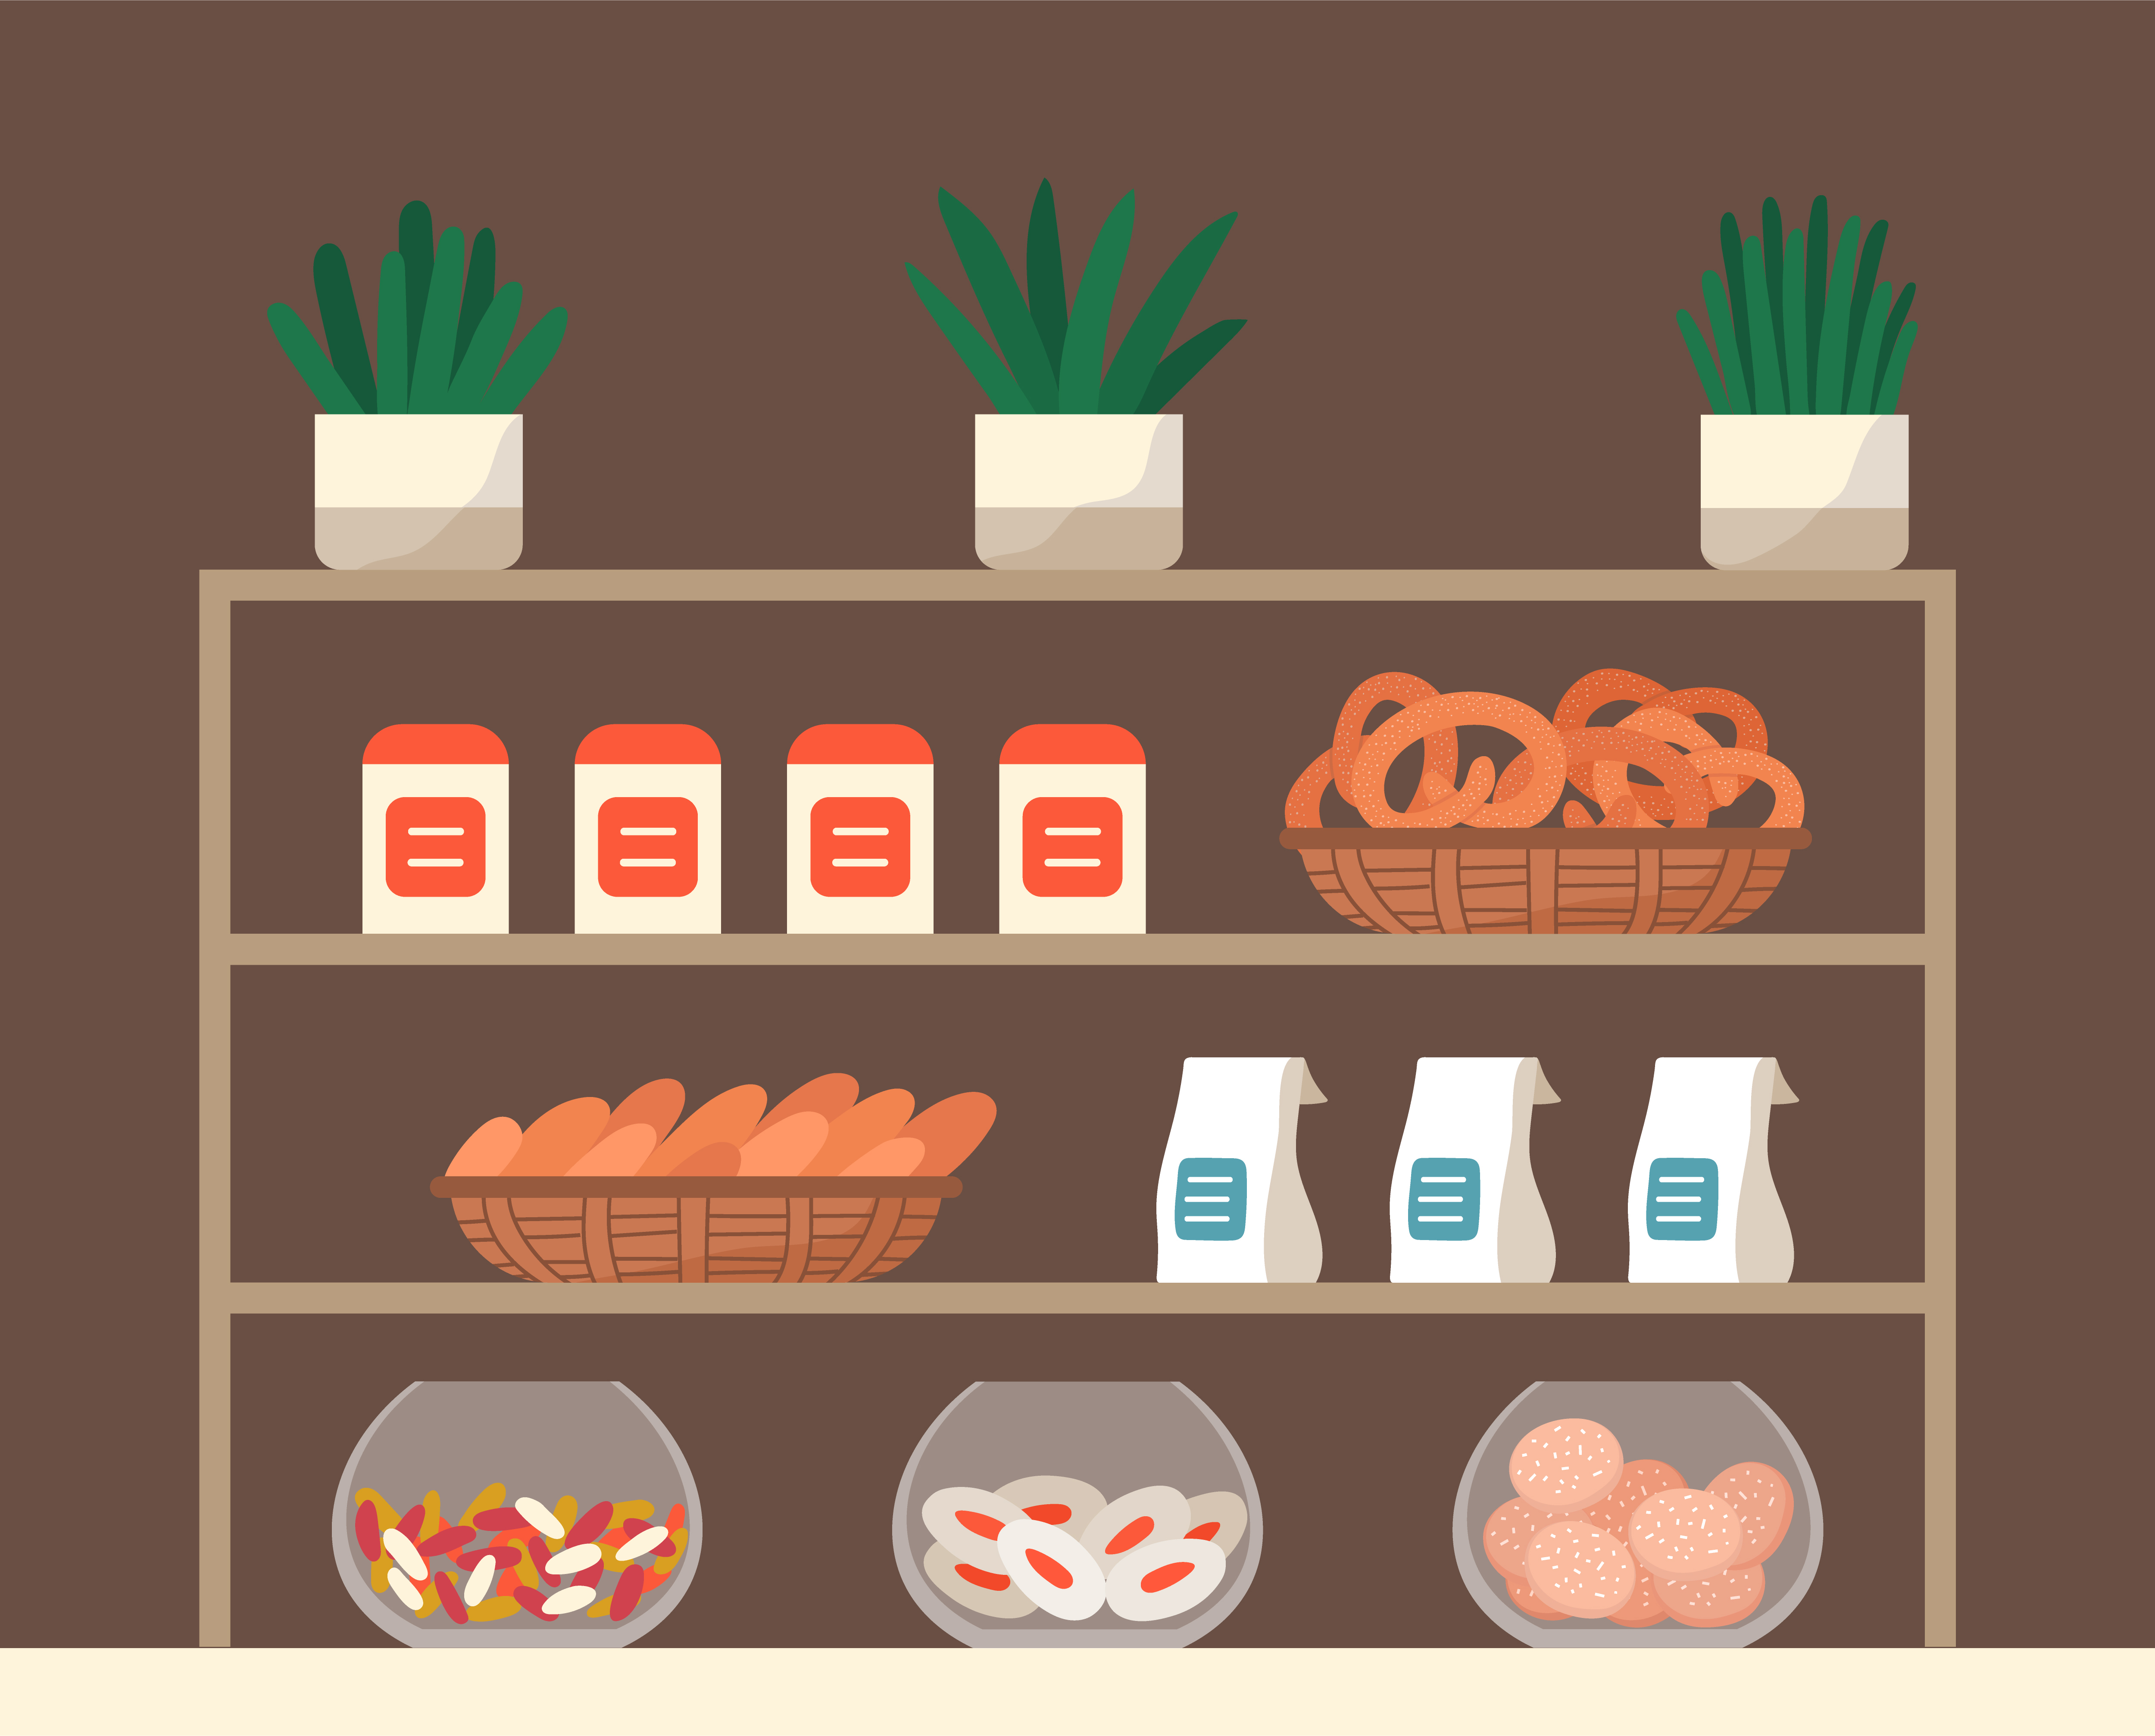 Showcase with confectionery inside. Biscuits, cookies and candies on rack in market or bakery. Delicious pastry on stand, tasty pretzels and kringles. Vector illustration of sweeties in flat style. Showcase with Pastry Like Cookies and Candies